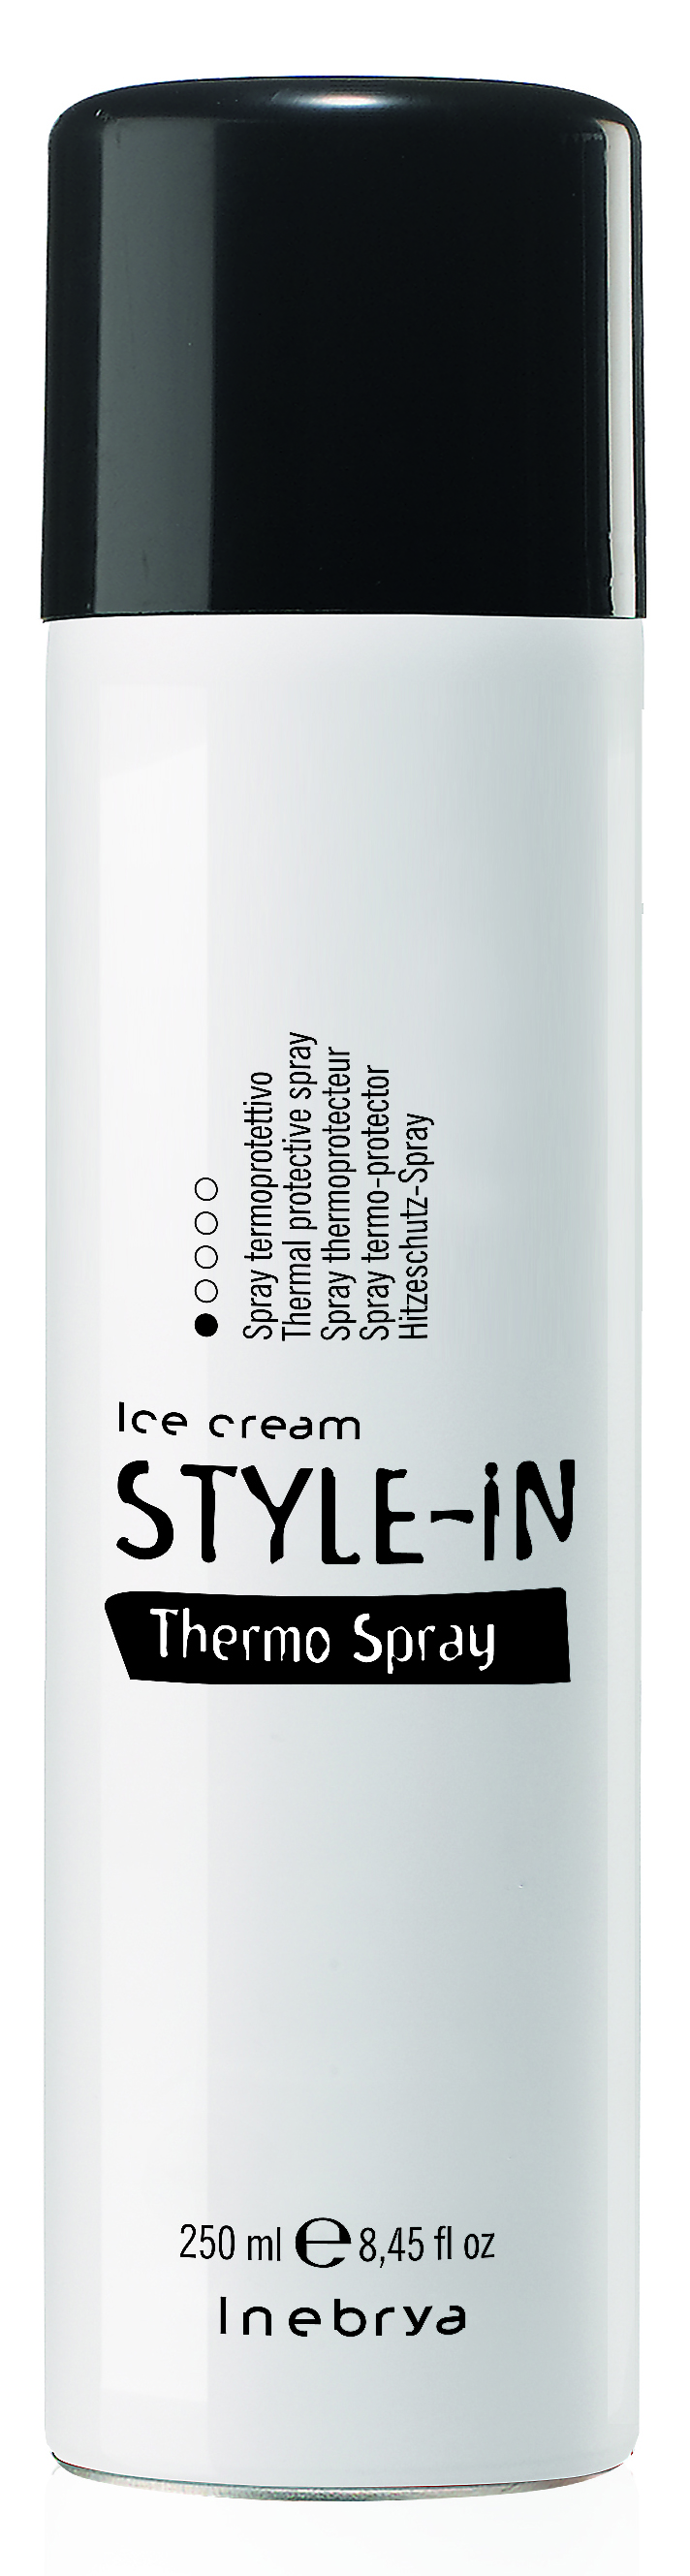 Style in Thermo Spray, 250ml